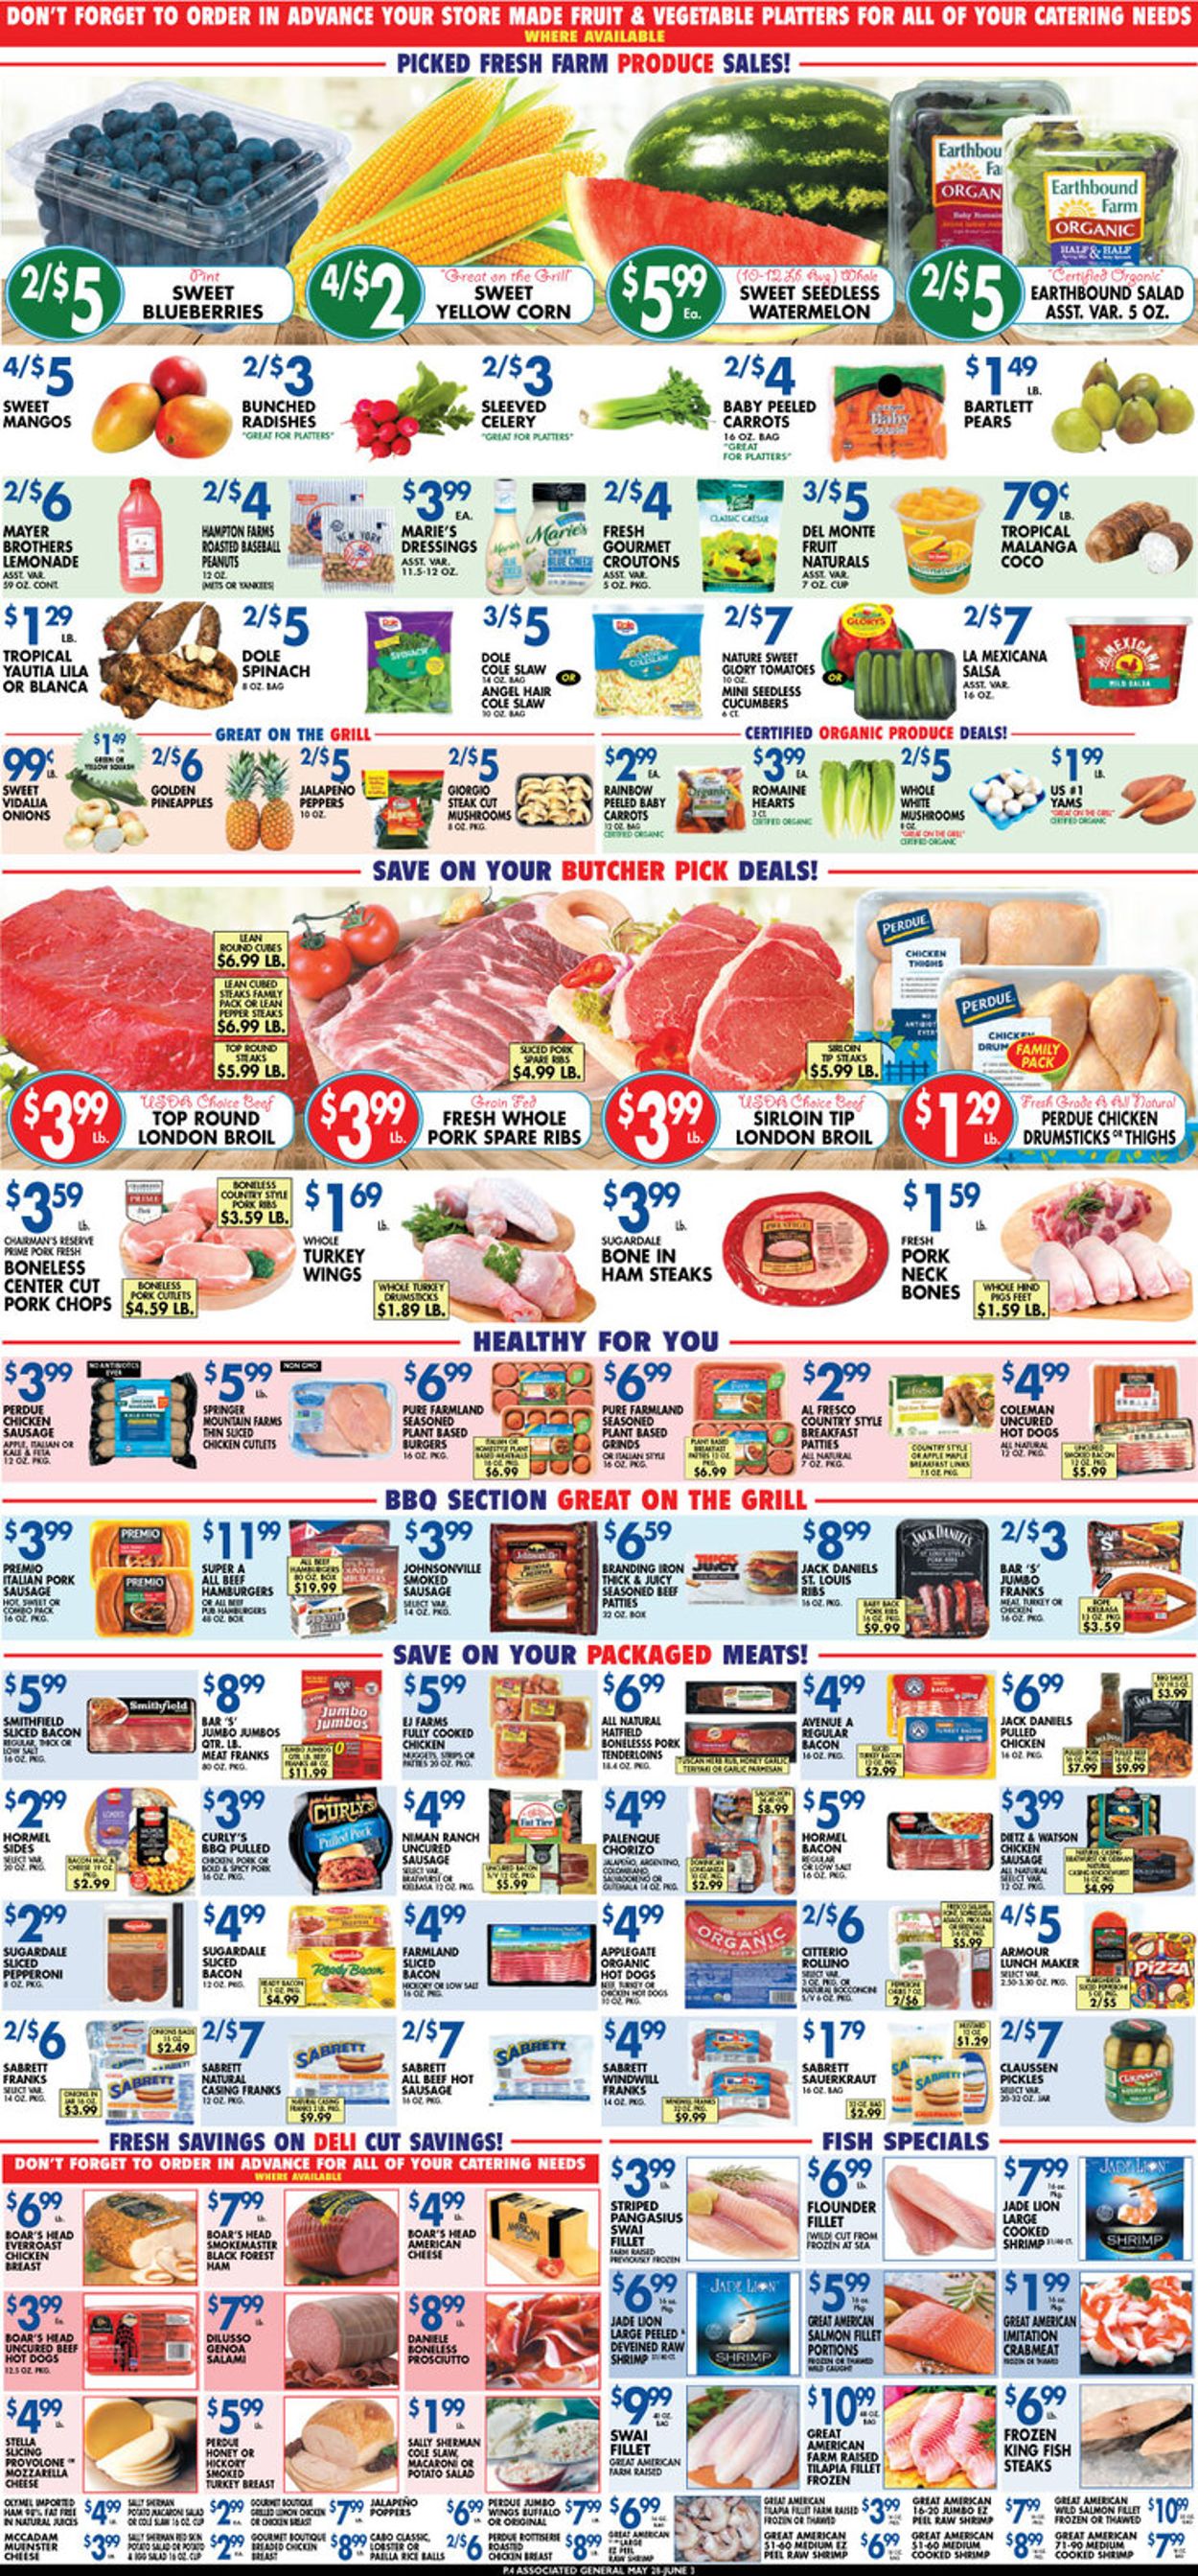 Associated Supermarkets Ad from 05/28/2021